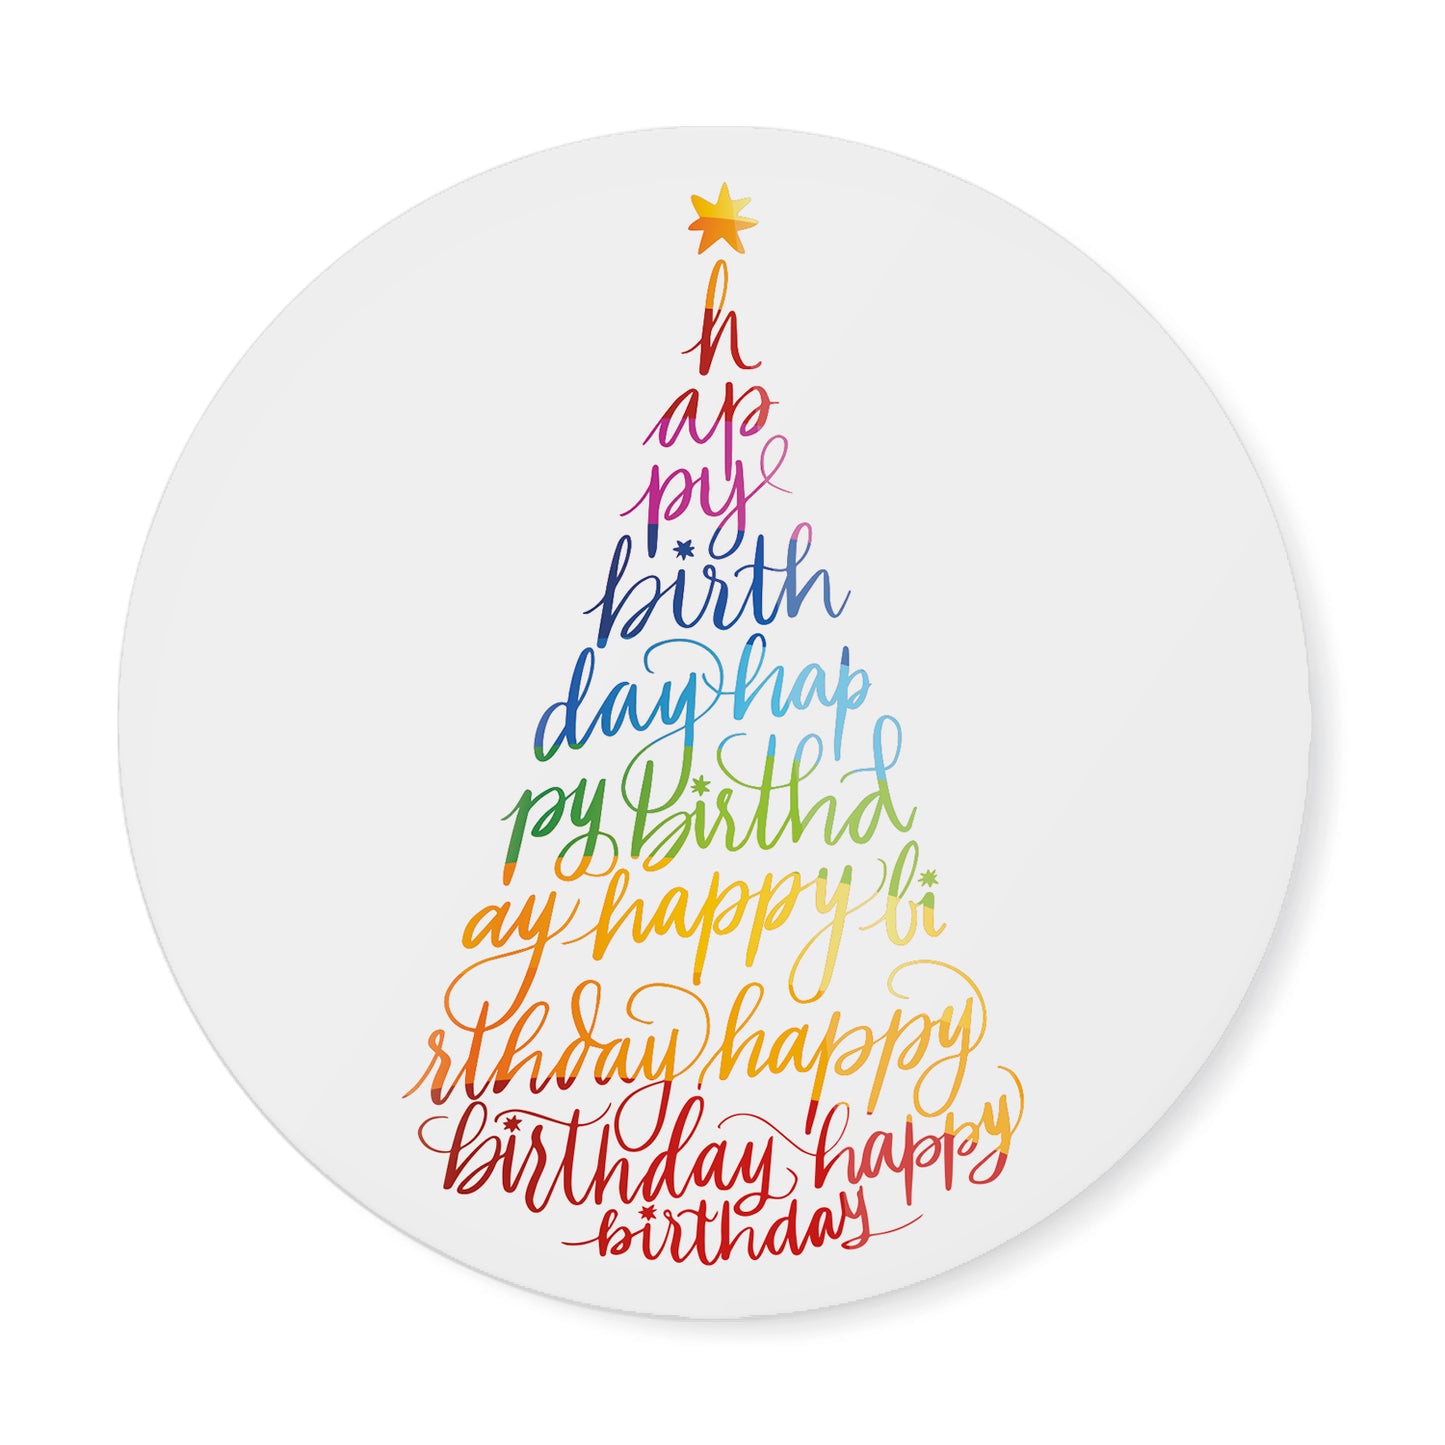 Thumbnail isolated sticker image: Happy Birthday Party hat, abstract calligraphy